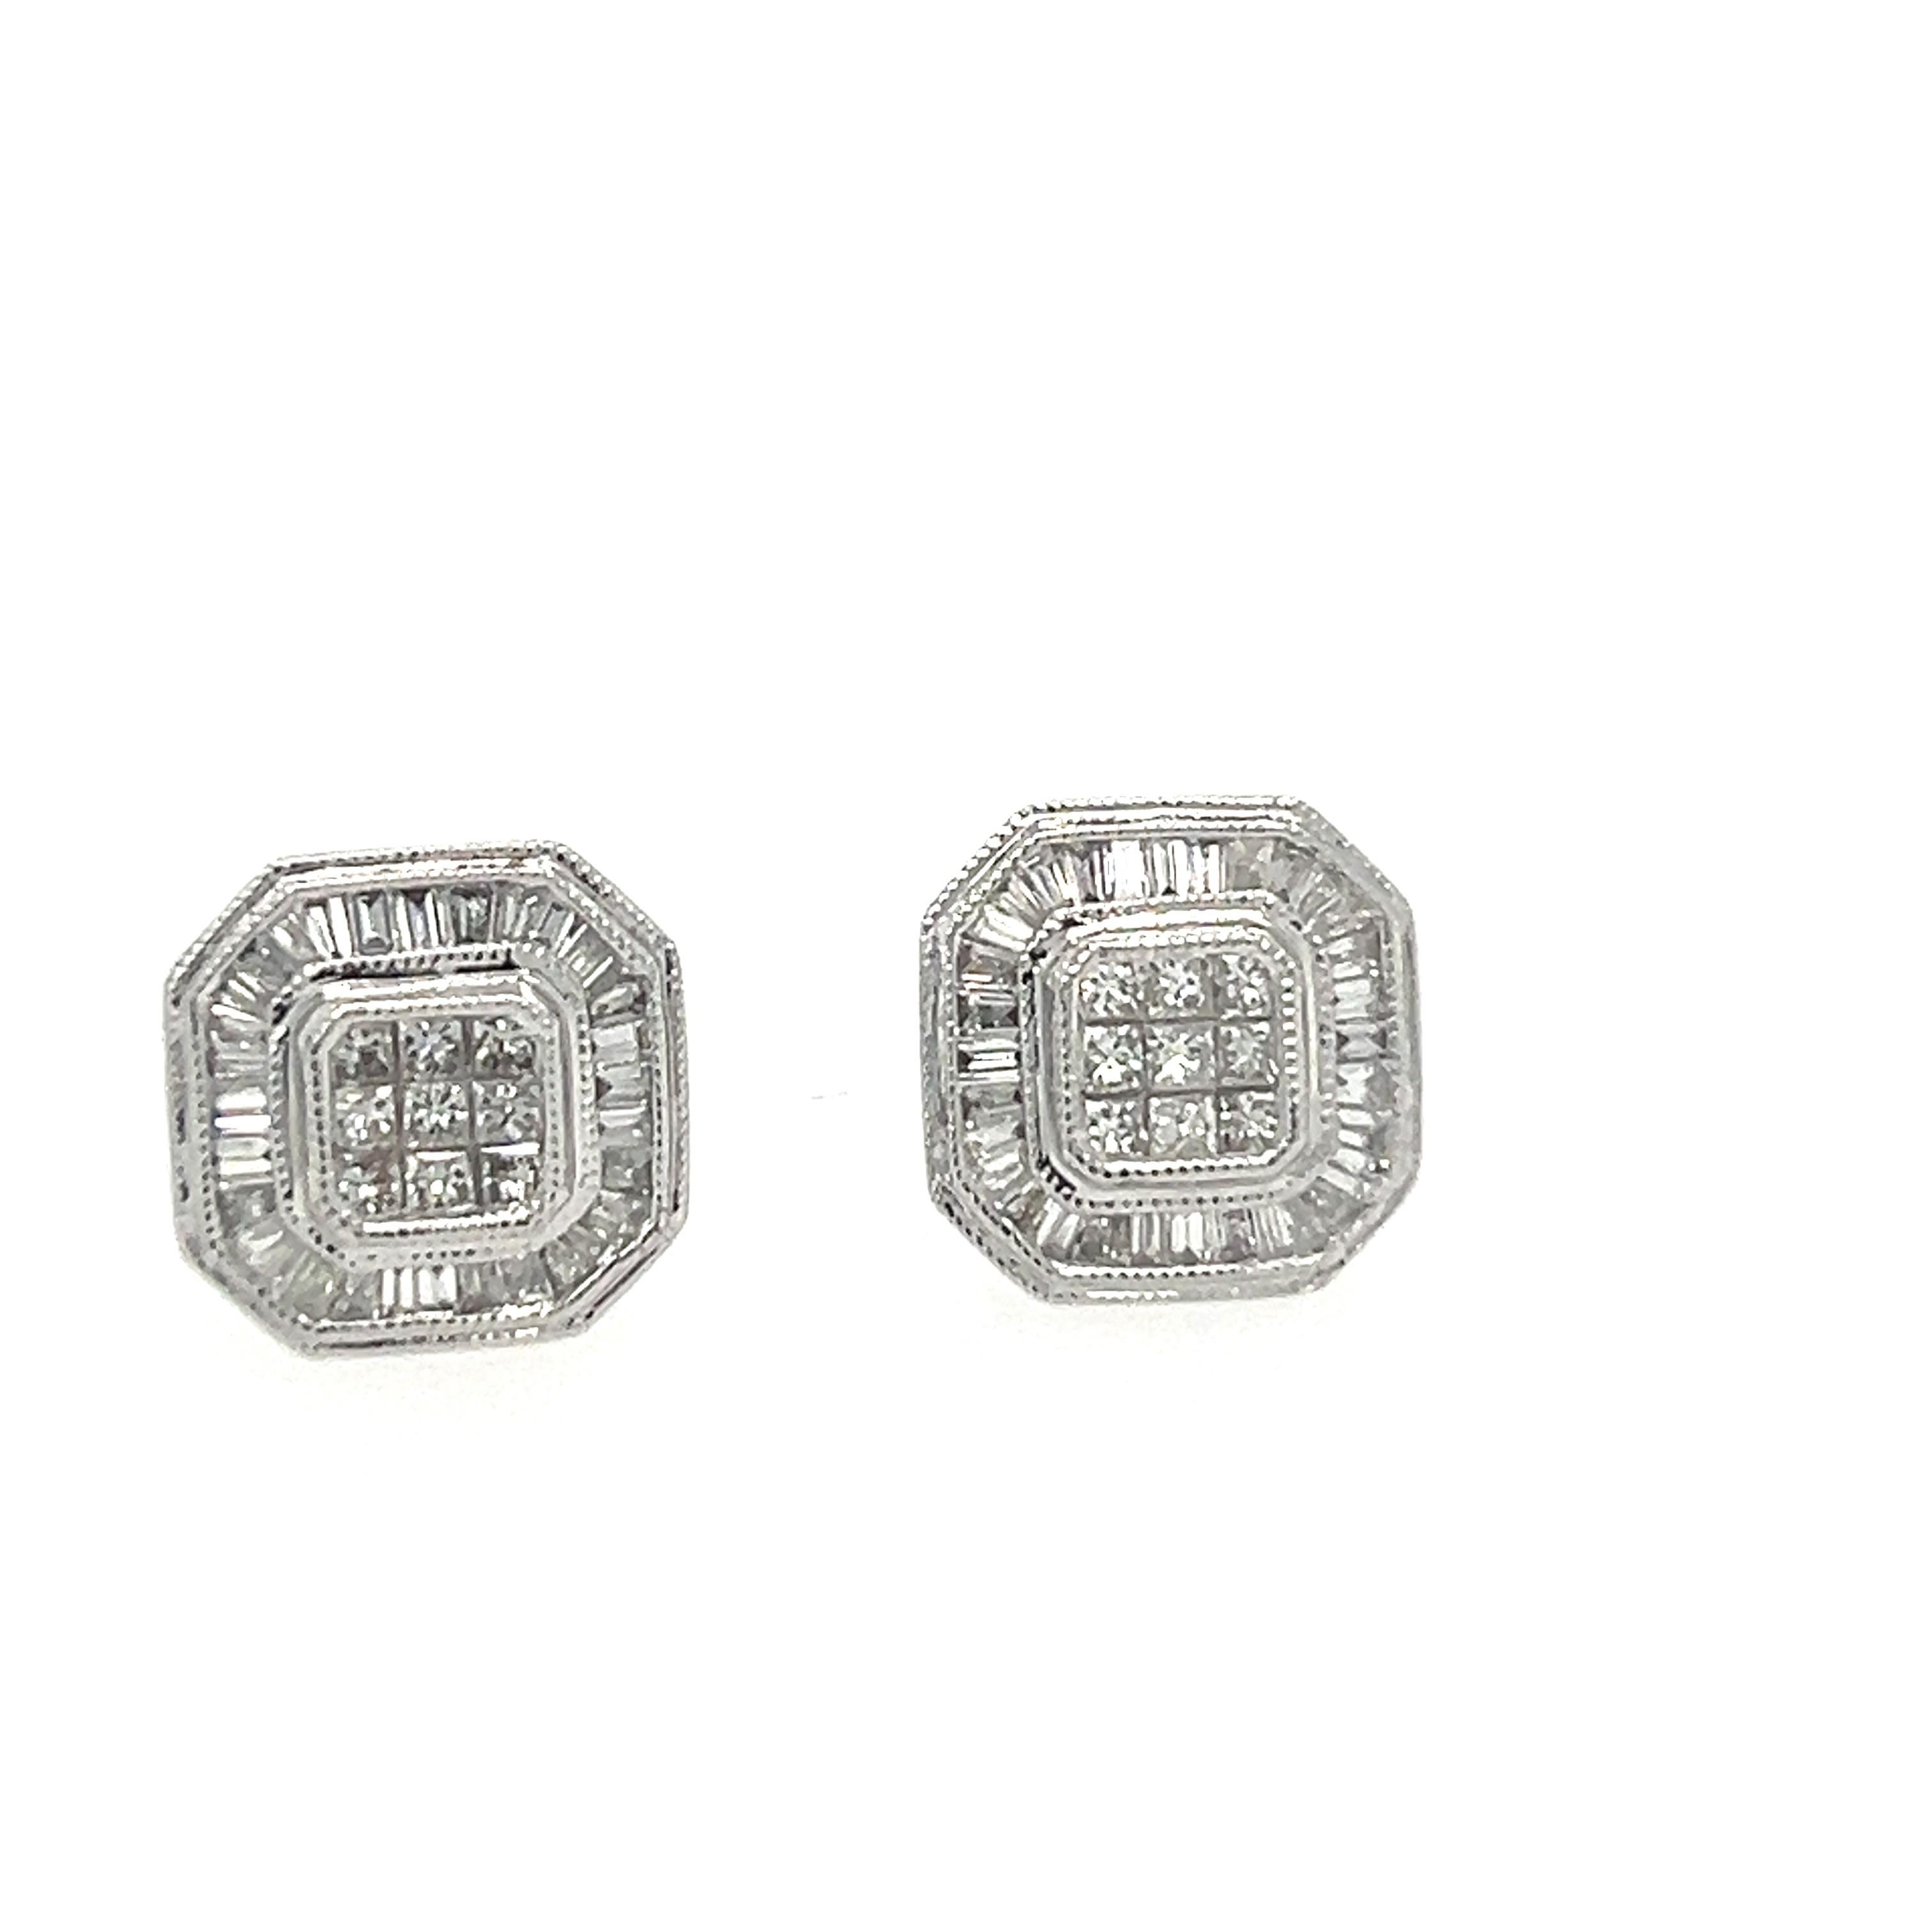 A Pair Of Diamond Square Cut-Cornered Diamond Cluster Stud Earrings.

Each earring with 9 invisible set princess cut diamonds within a border of 32 tapered baguette cut diamonds channel set in 18ct white gold.

Diamonds 82 = 0.75ct